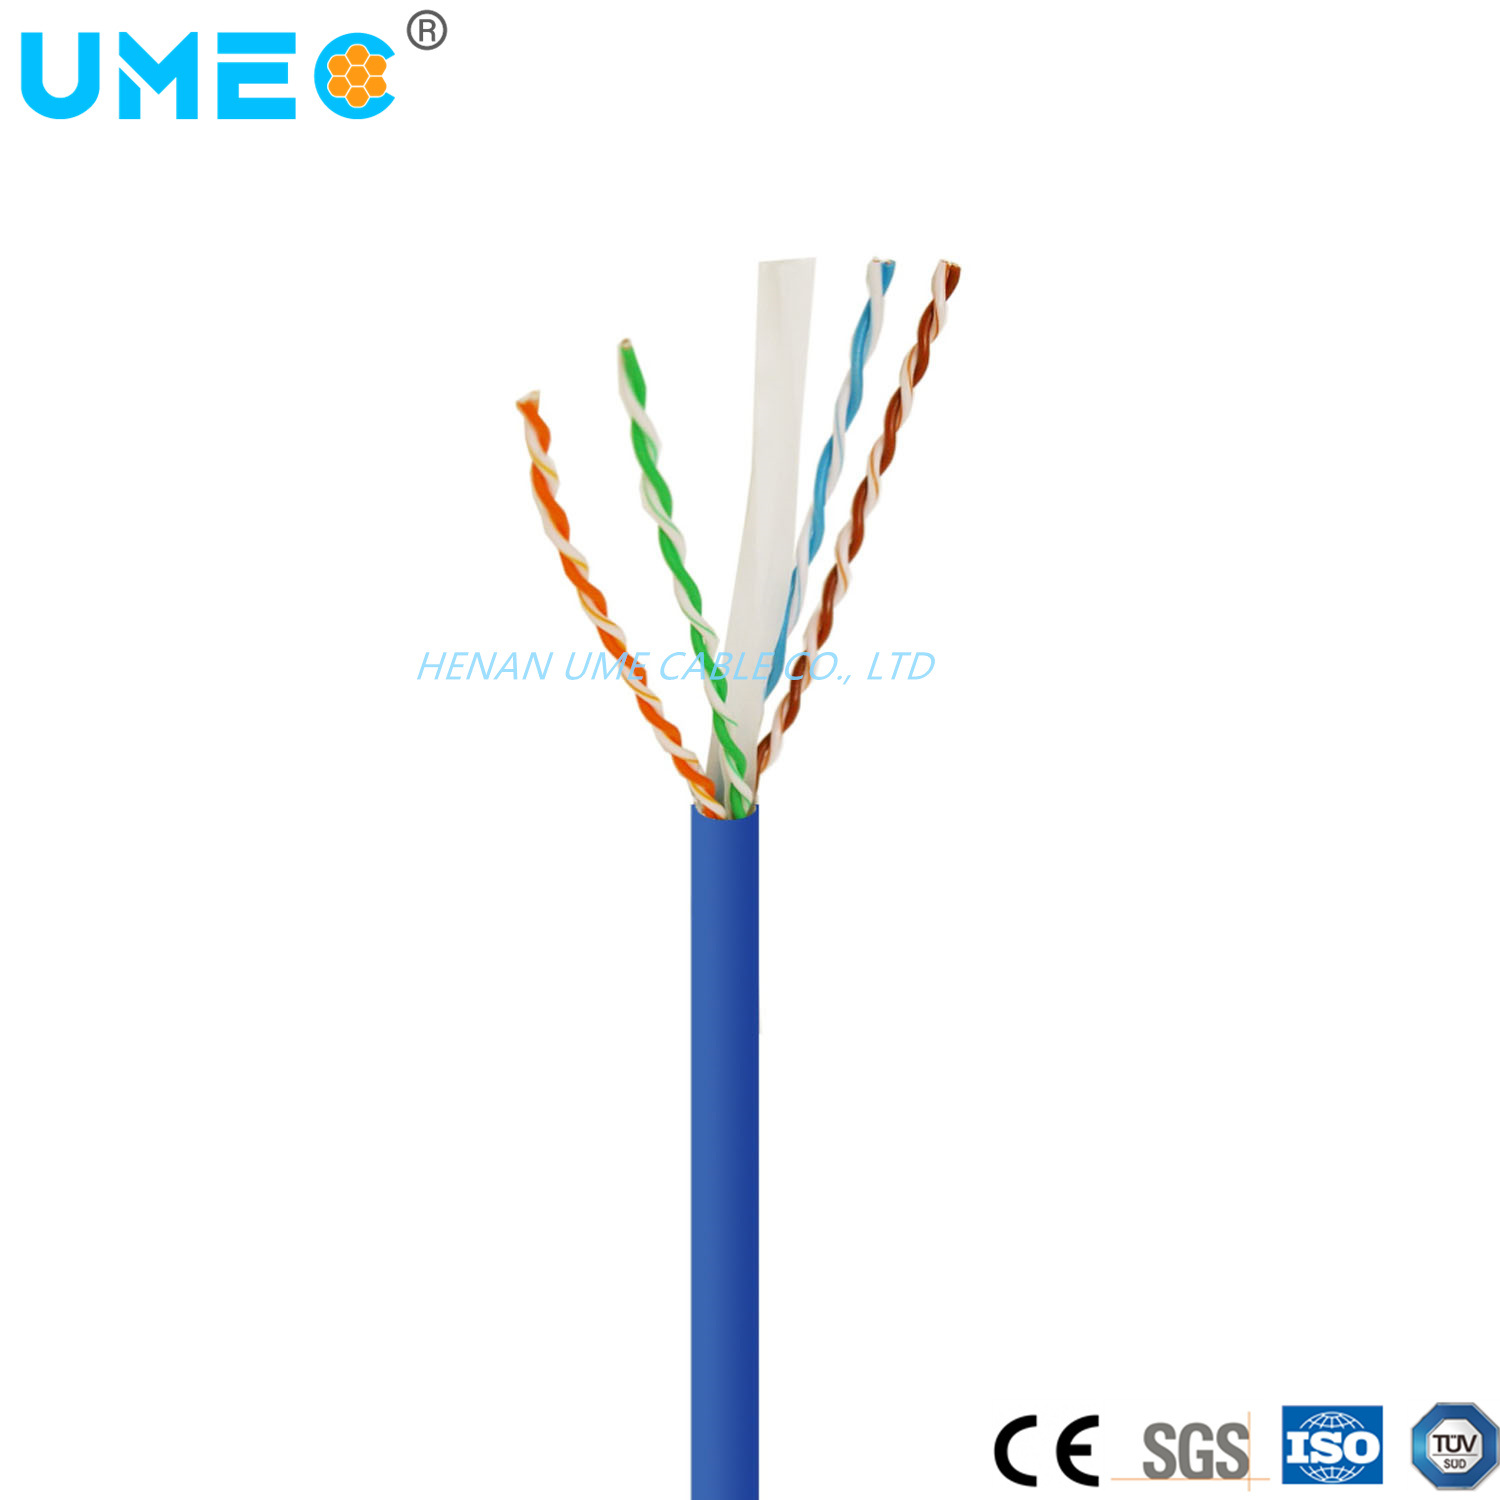 OEM Hight Speed Cat-5e Network Ethernet Cable for Desktop Notebook Router Cord Bulk 23AWG 24AWG 25AWG 26AWG